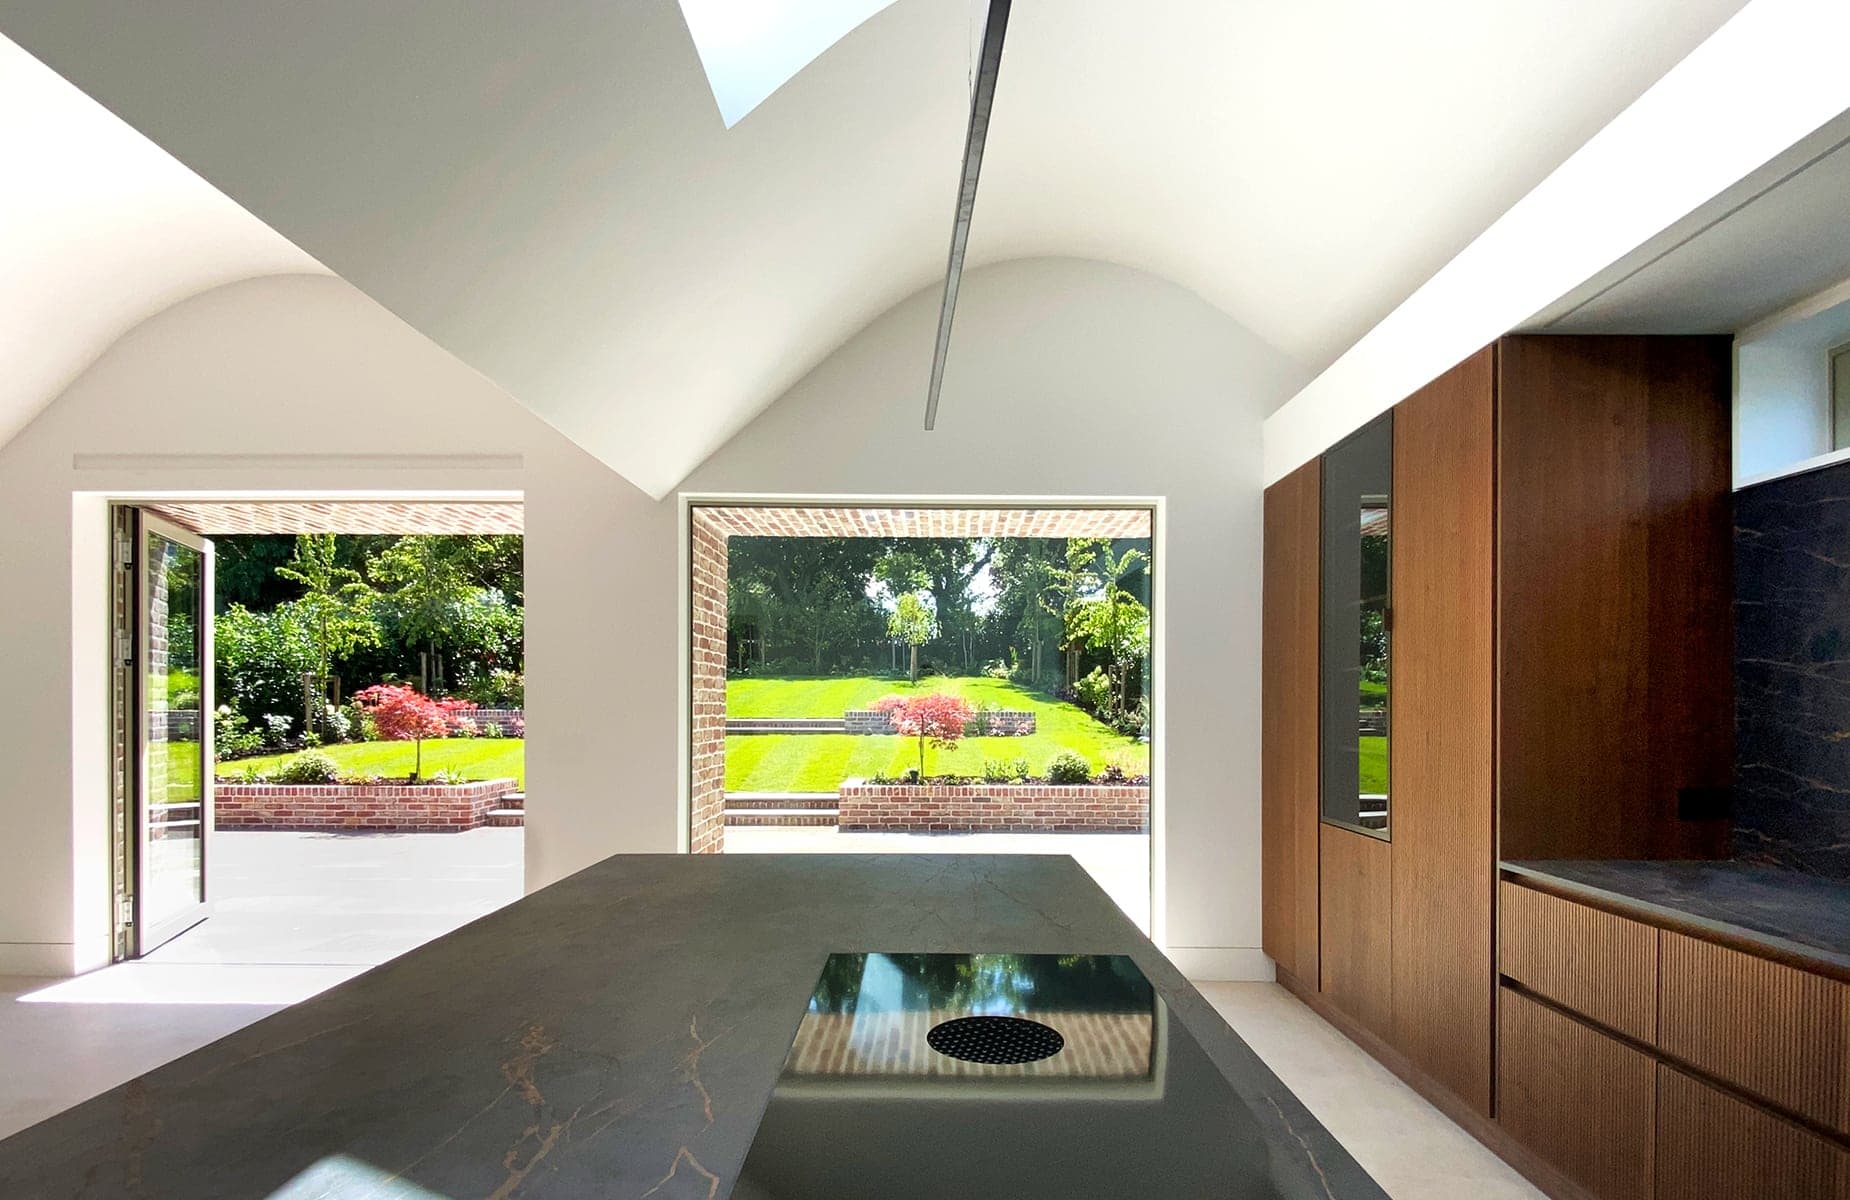 Dublin Architects design a bright kitchen with a skylight and a spacious island, perfect for cooking and entertaining guests